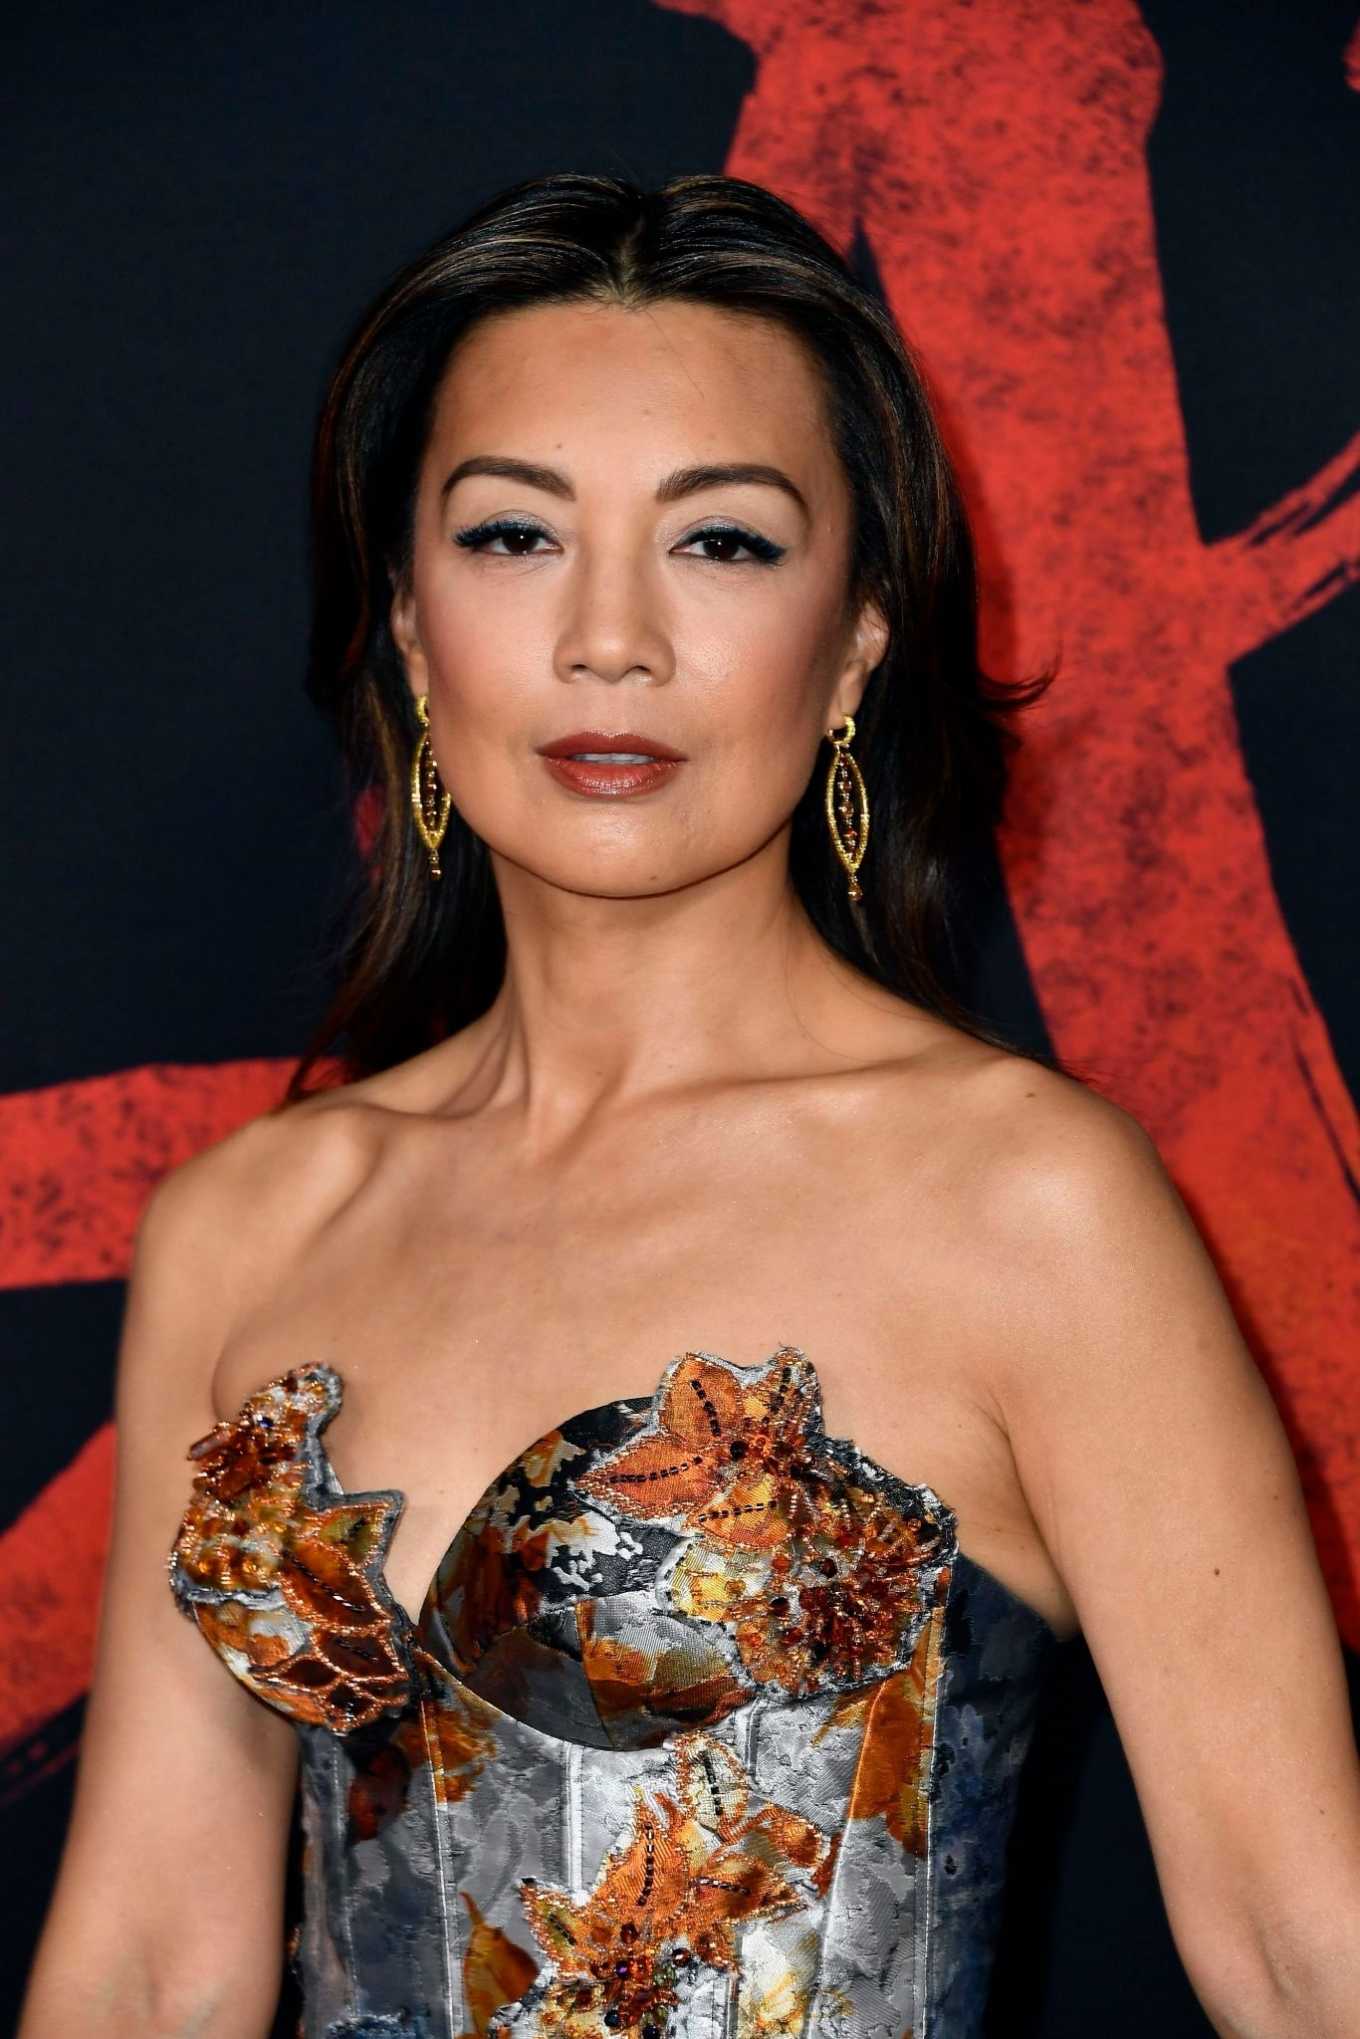 https://static.wikia.nocookie.net/mgw-productions-games/images/f/ff/Ming-Na-Wen---Mulan-Premiere-in-Hollywood-16.jpg/revision/latest?cb=20200825045337